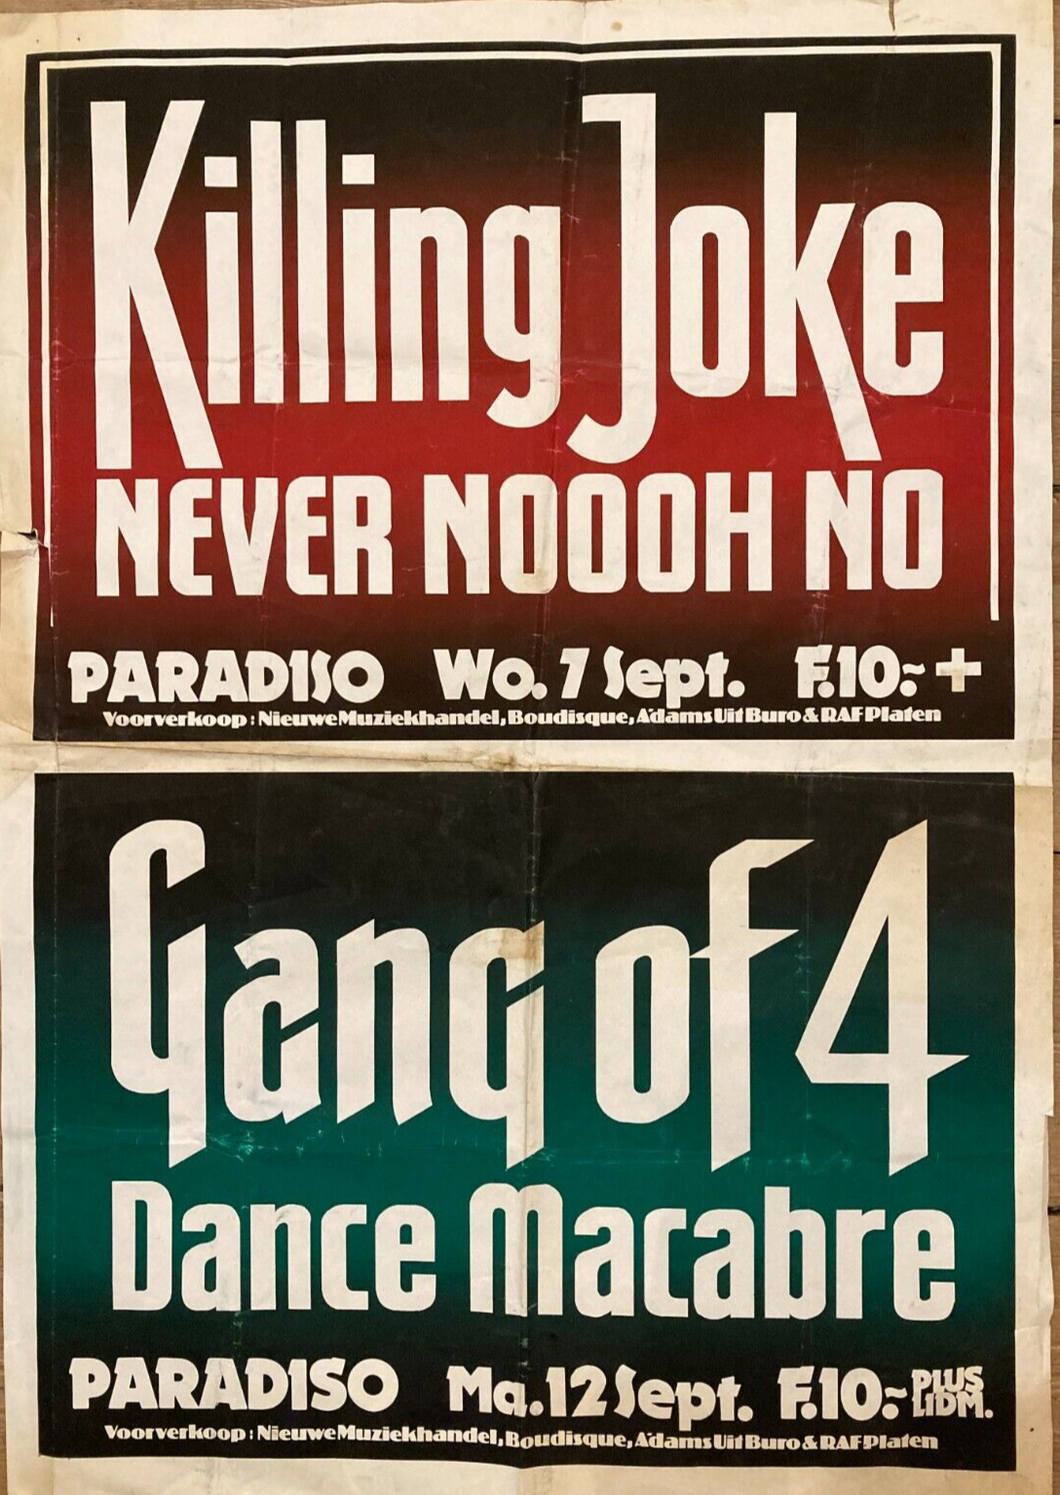 Killing Joke & Gang of 4 original poster - Live at the Paradiso, Amsterdam 1983 Rare - Original Music and Movie Posters for sale from Bamalama - Online Poster Store UK London